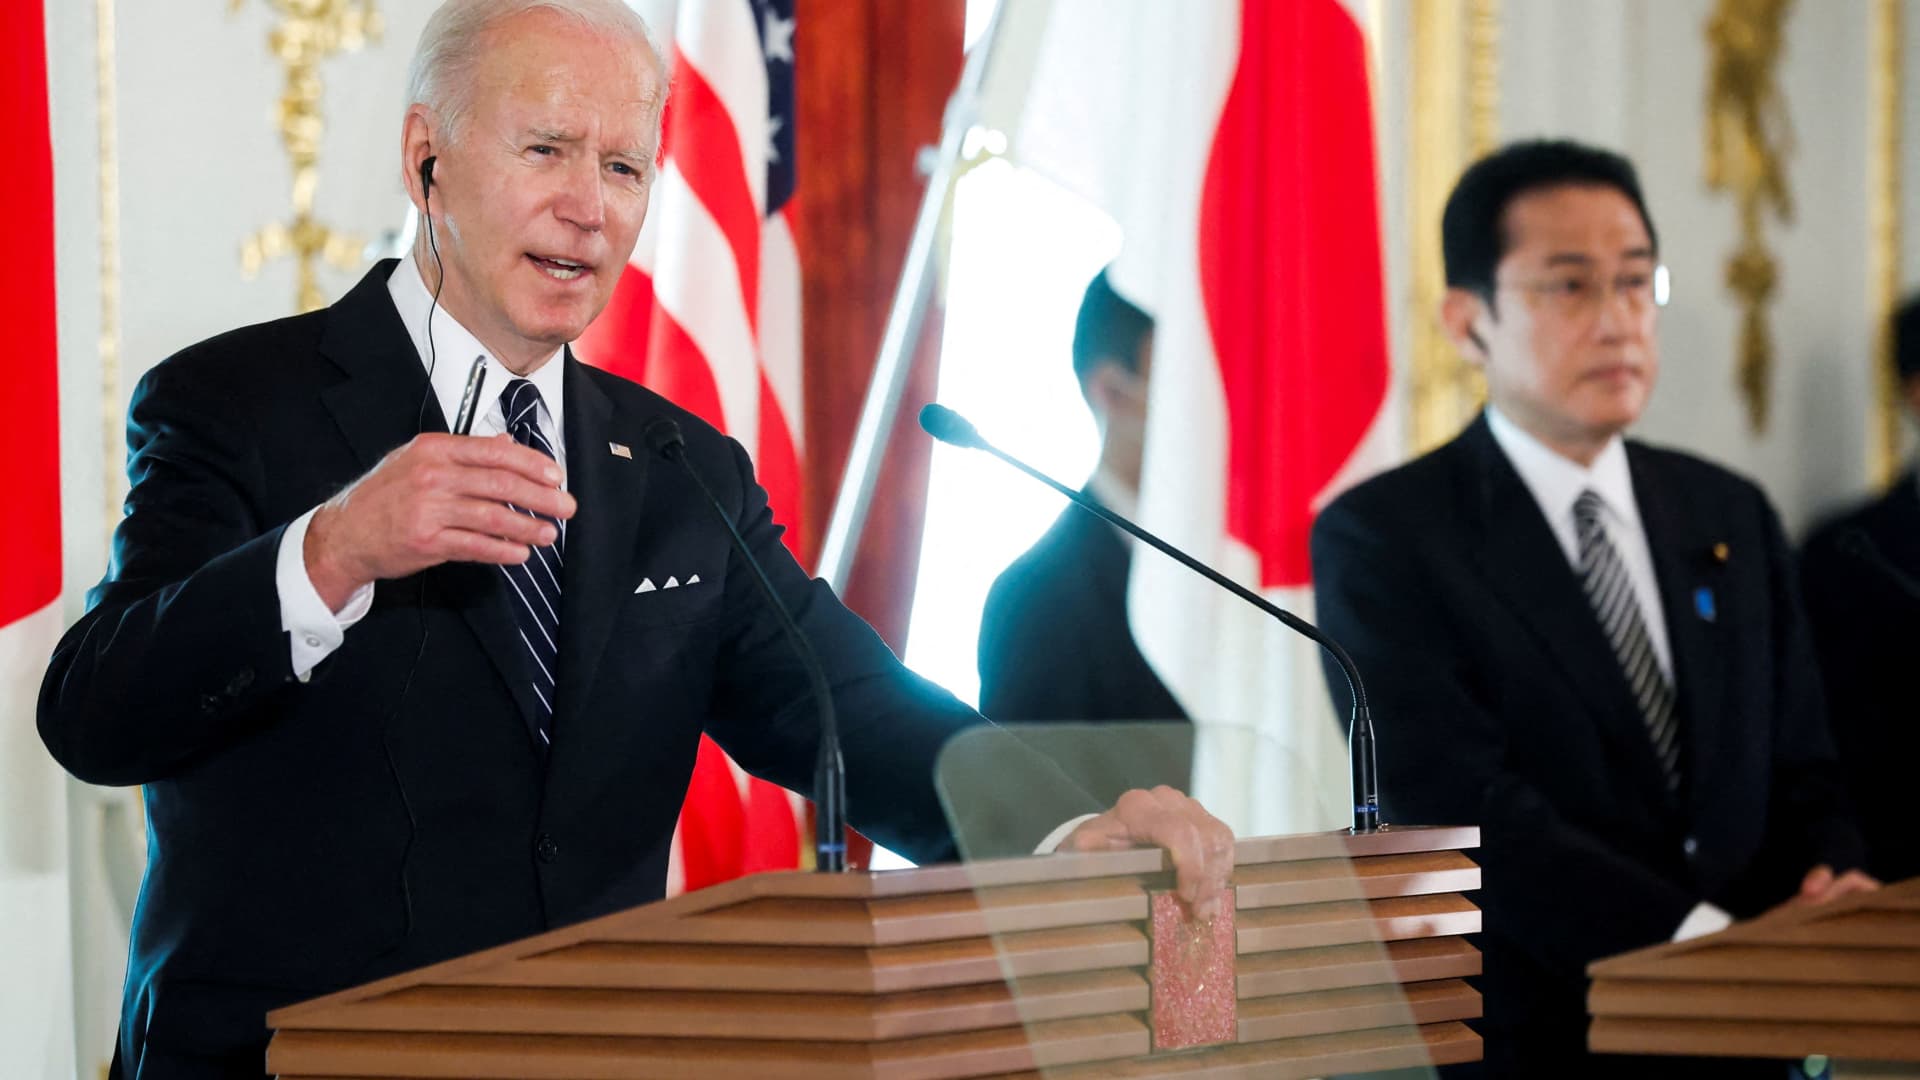 Biden says his Taiwan comments don't reflect a change in U.S. policy after drawing ire from China